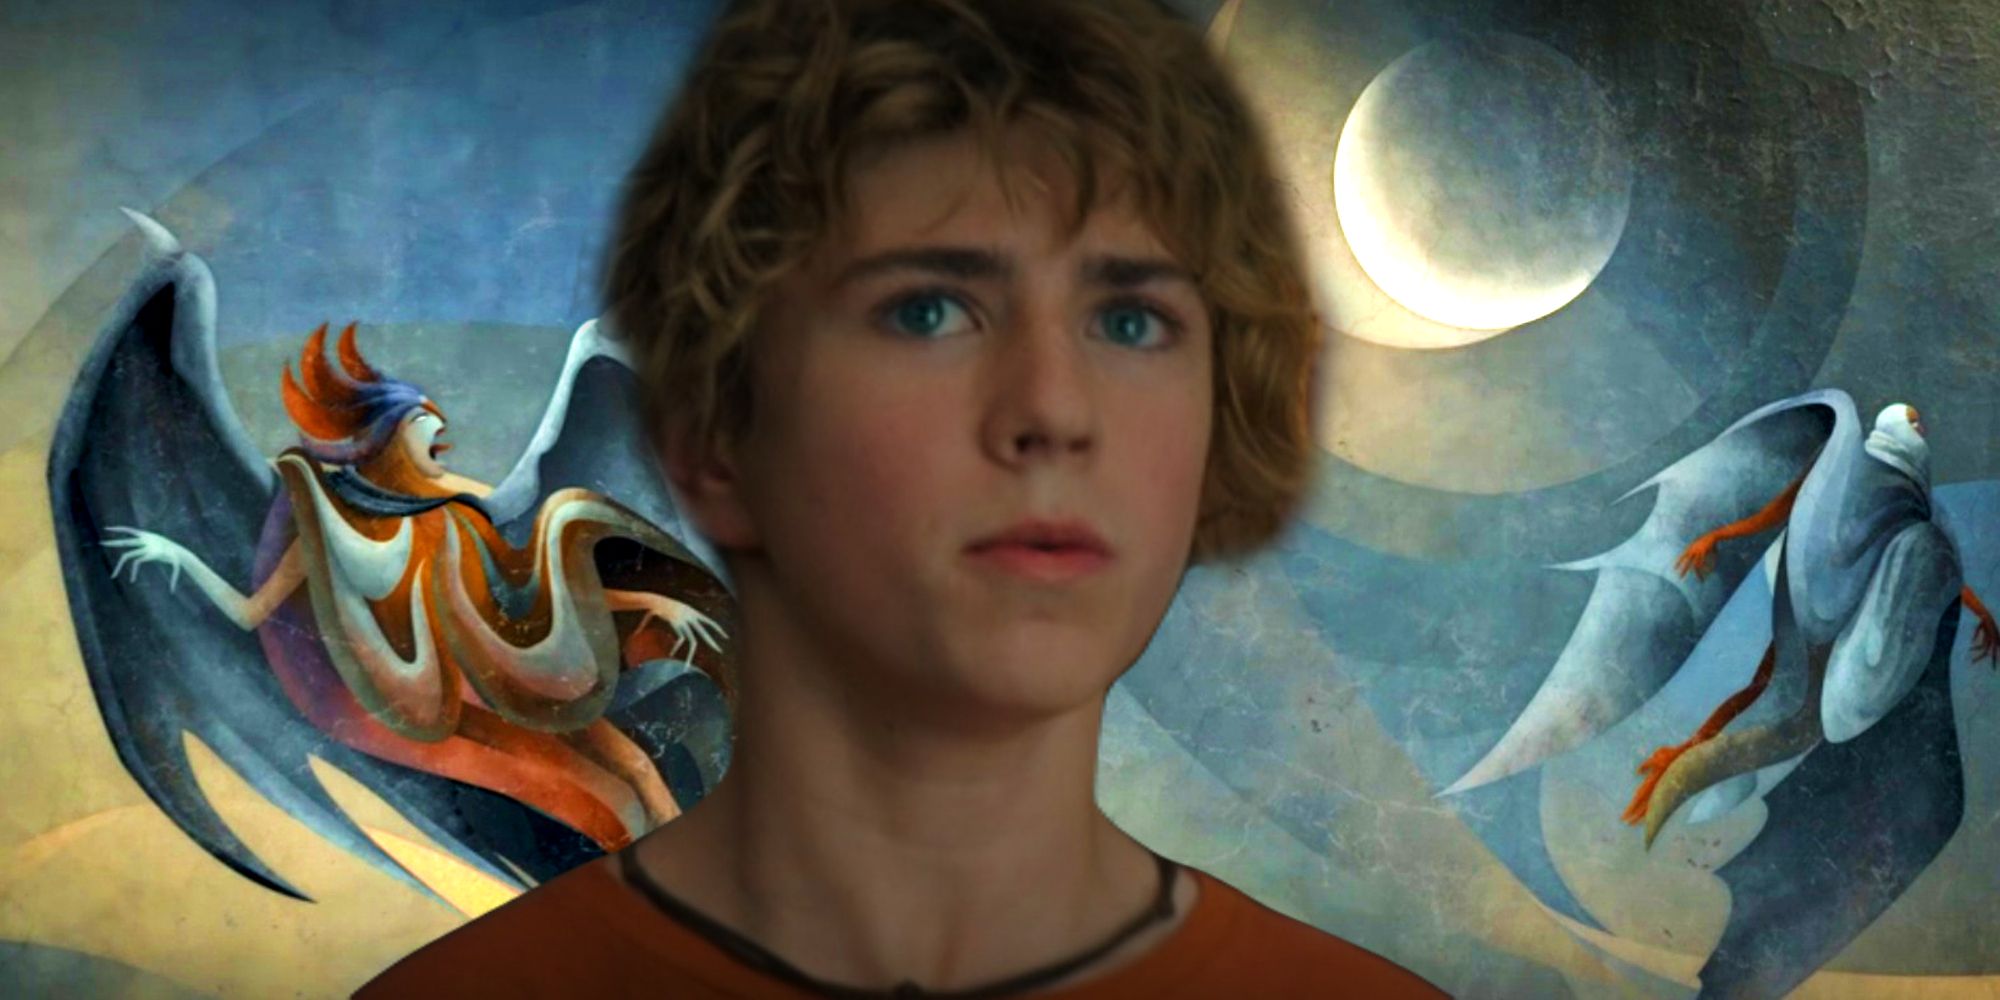 Walker Scobell looking confused as Percy Jackson above an image of the Furies from Percy Jackson and the Olympians' end-credits sequence